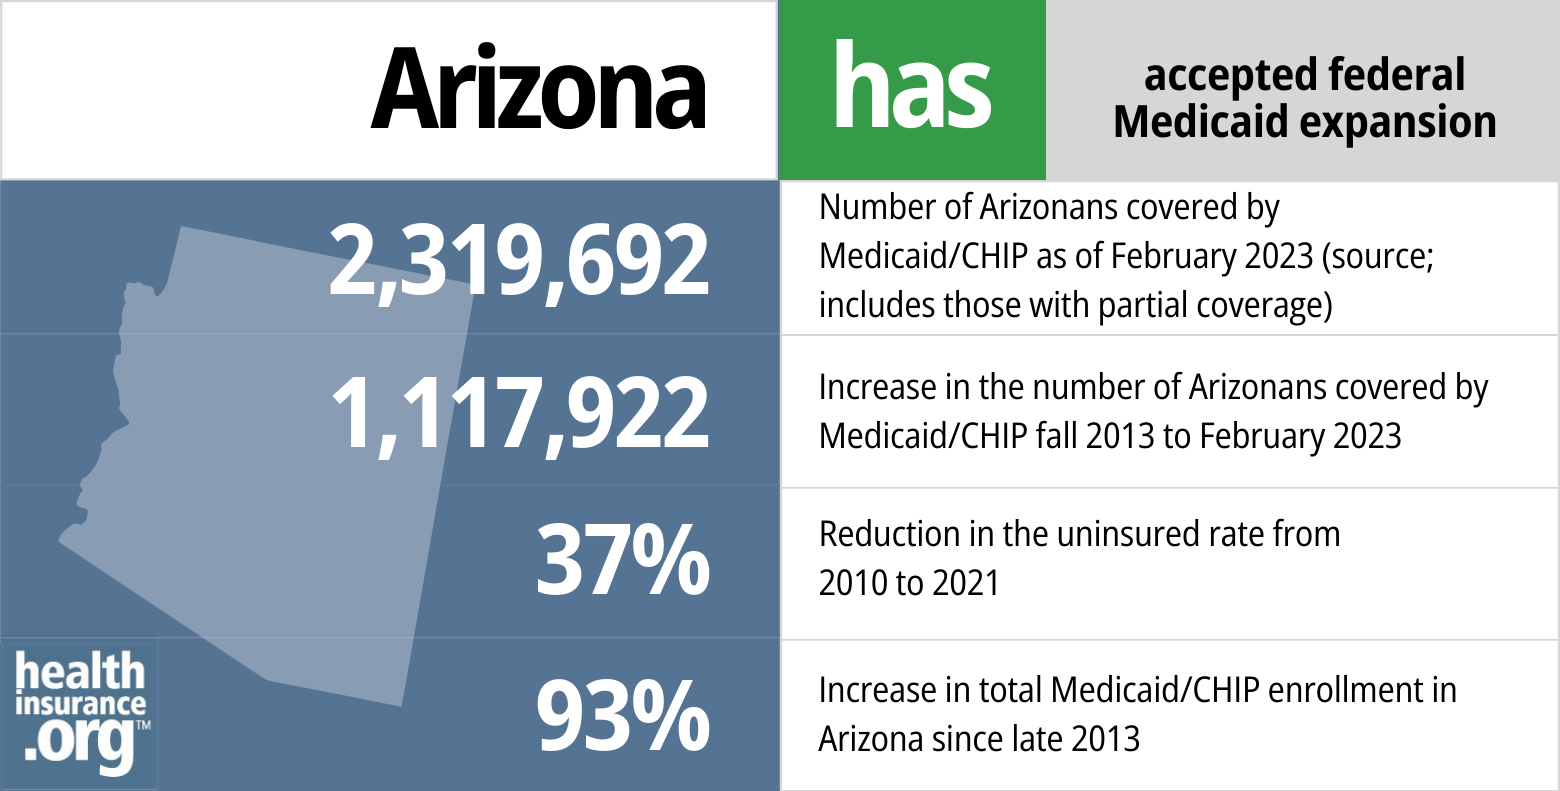 For Providers Archives - AZ Care Network